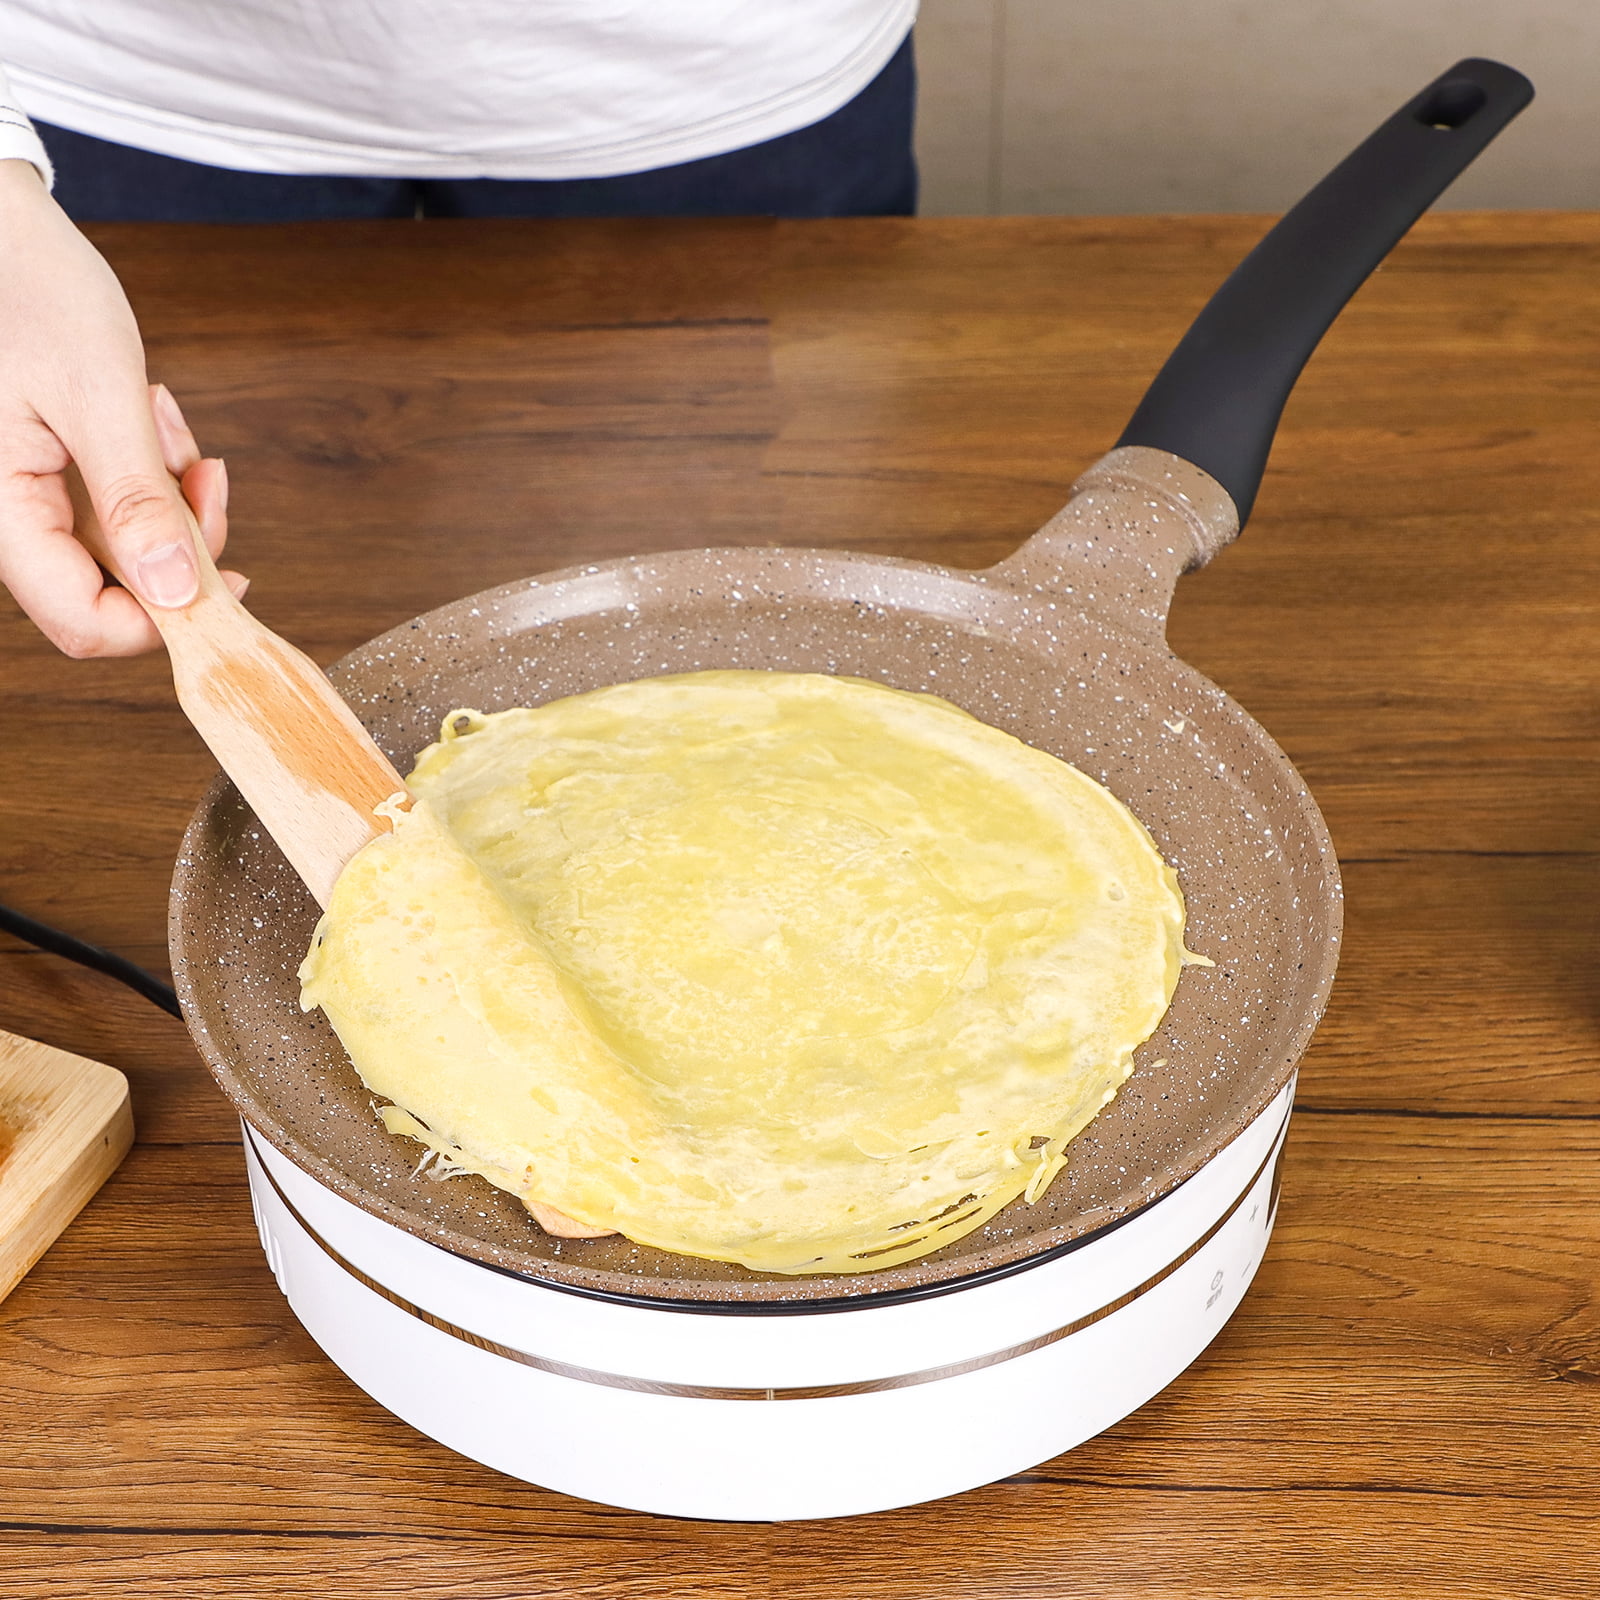 Crepe Pan Nonstick with Spreader and Spatula Set for Dosa Tawa